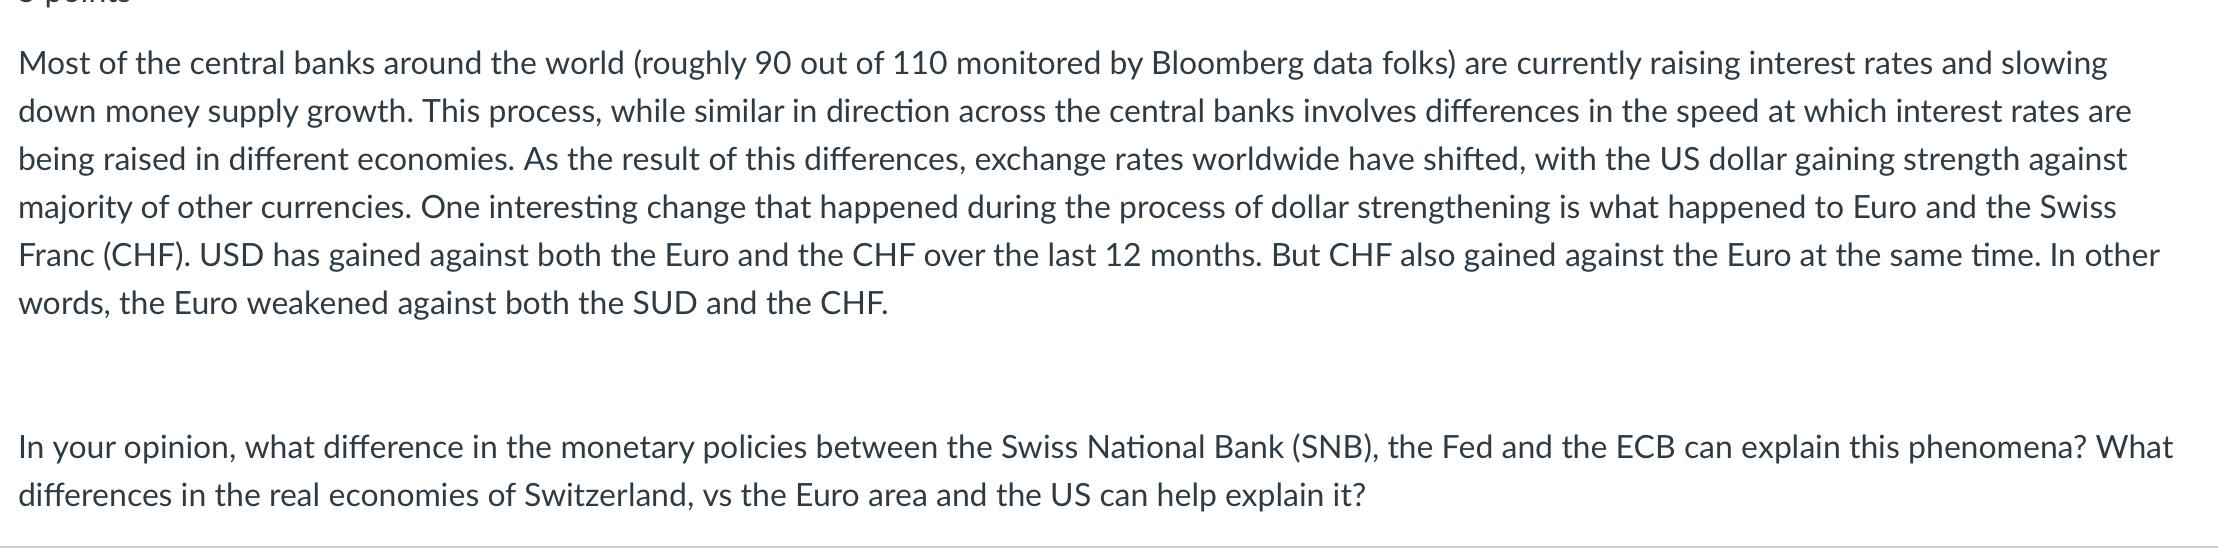 Most of the central banks around the world (roughly 90 out of 110 monitored by Bloomberg data folks) are currently raising in